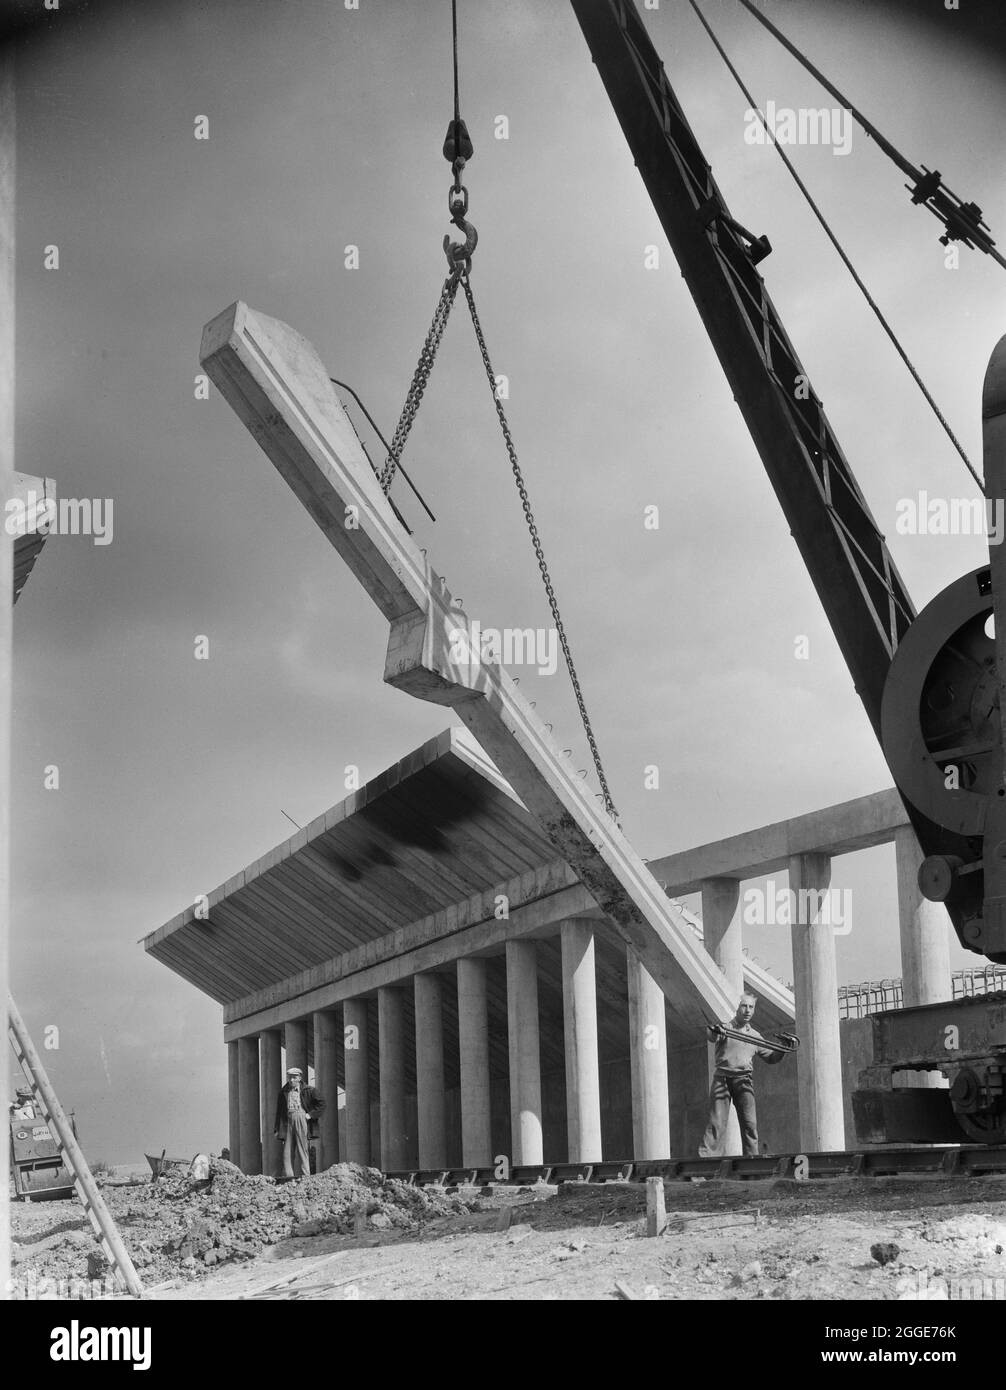 A precast cantilever beam being lifted into position during the construction of Structure 66, a railway underbridge on the London to Yorkshire Motorway (the M1). Structure 66 carried the Stratford on Avon, Towcester &amp; Midland Junction Railway under the motorway. The image shows in-situ columns, beams and abutment walls. Stock Photo